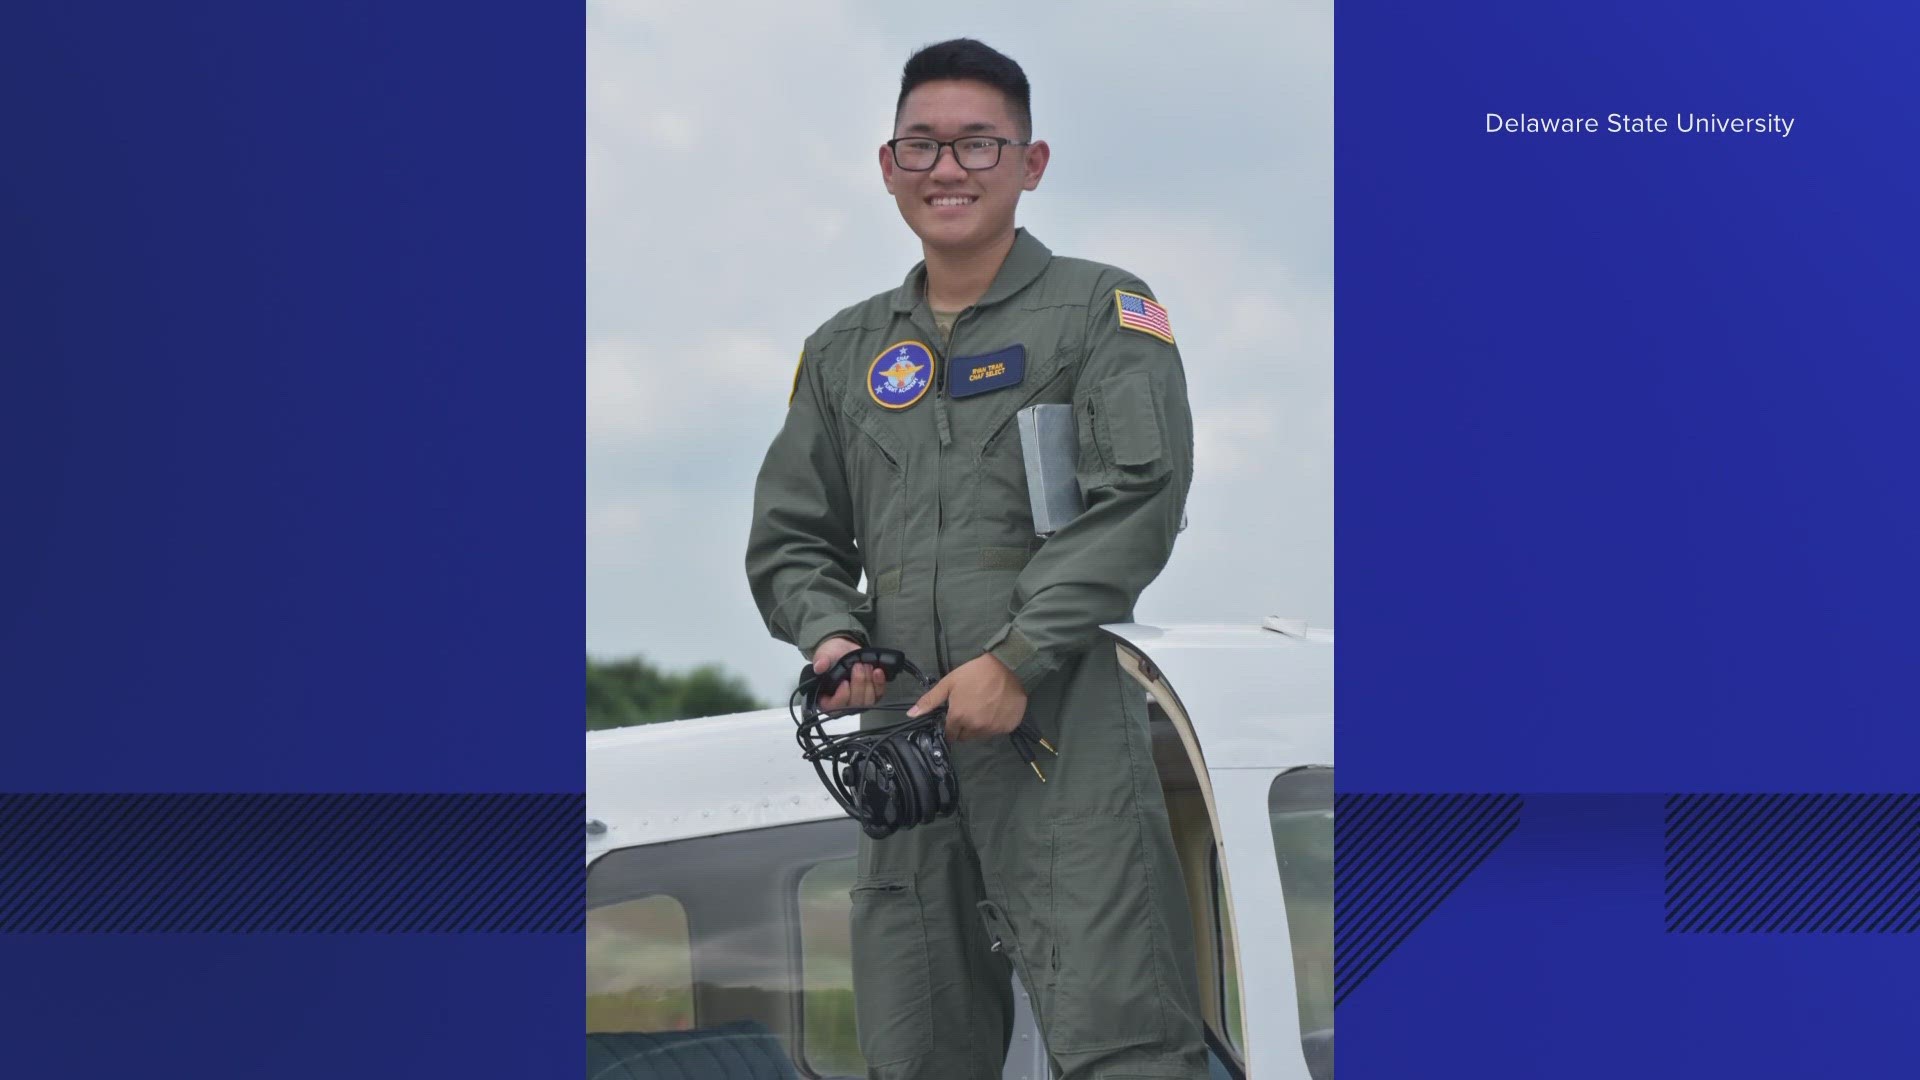 Ryan Tran was one of 28 high school juniors and seniors from across the country taking part in the training.